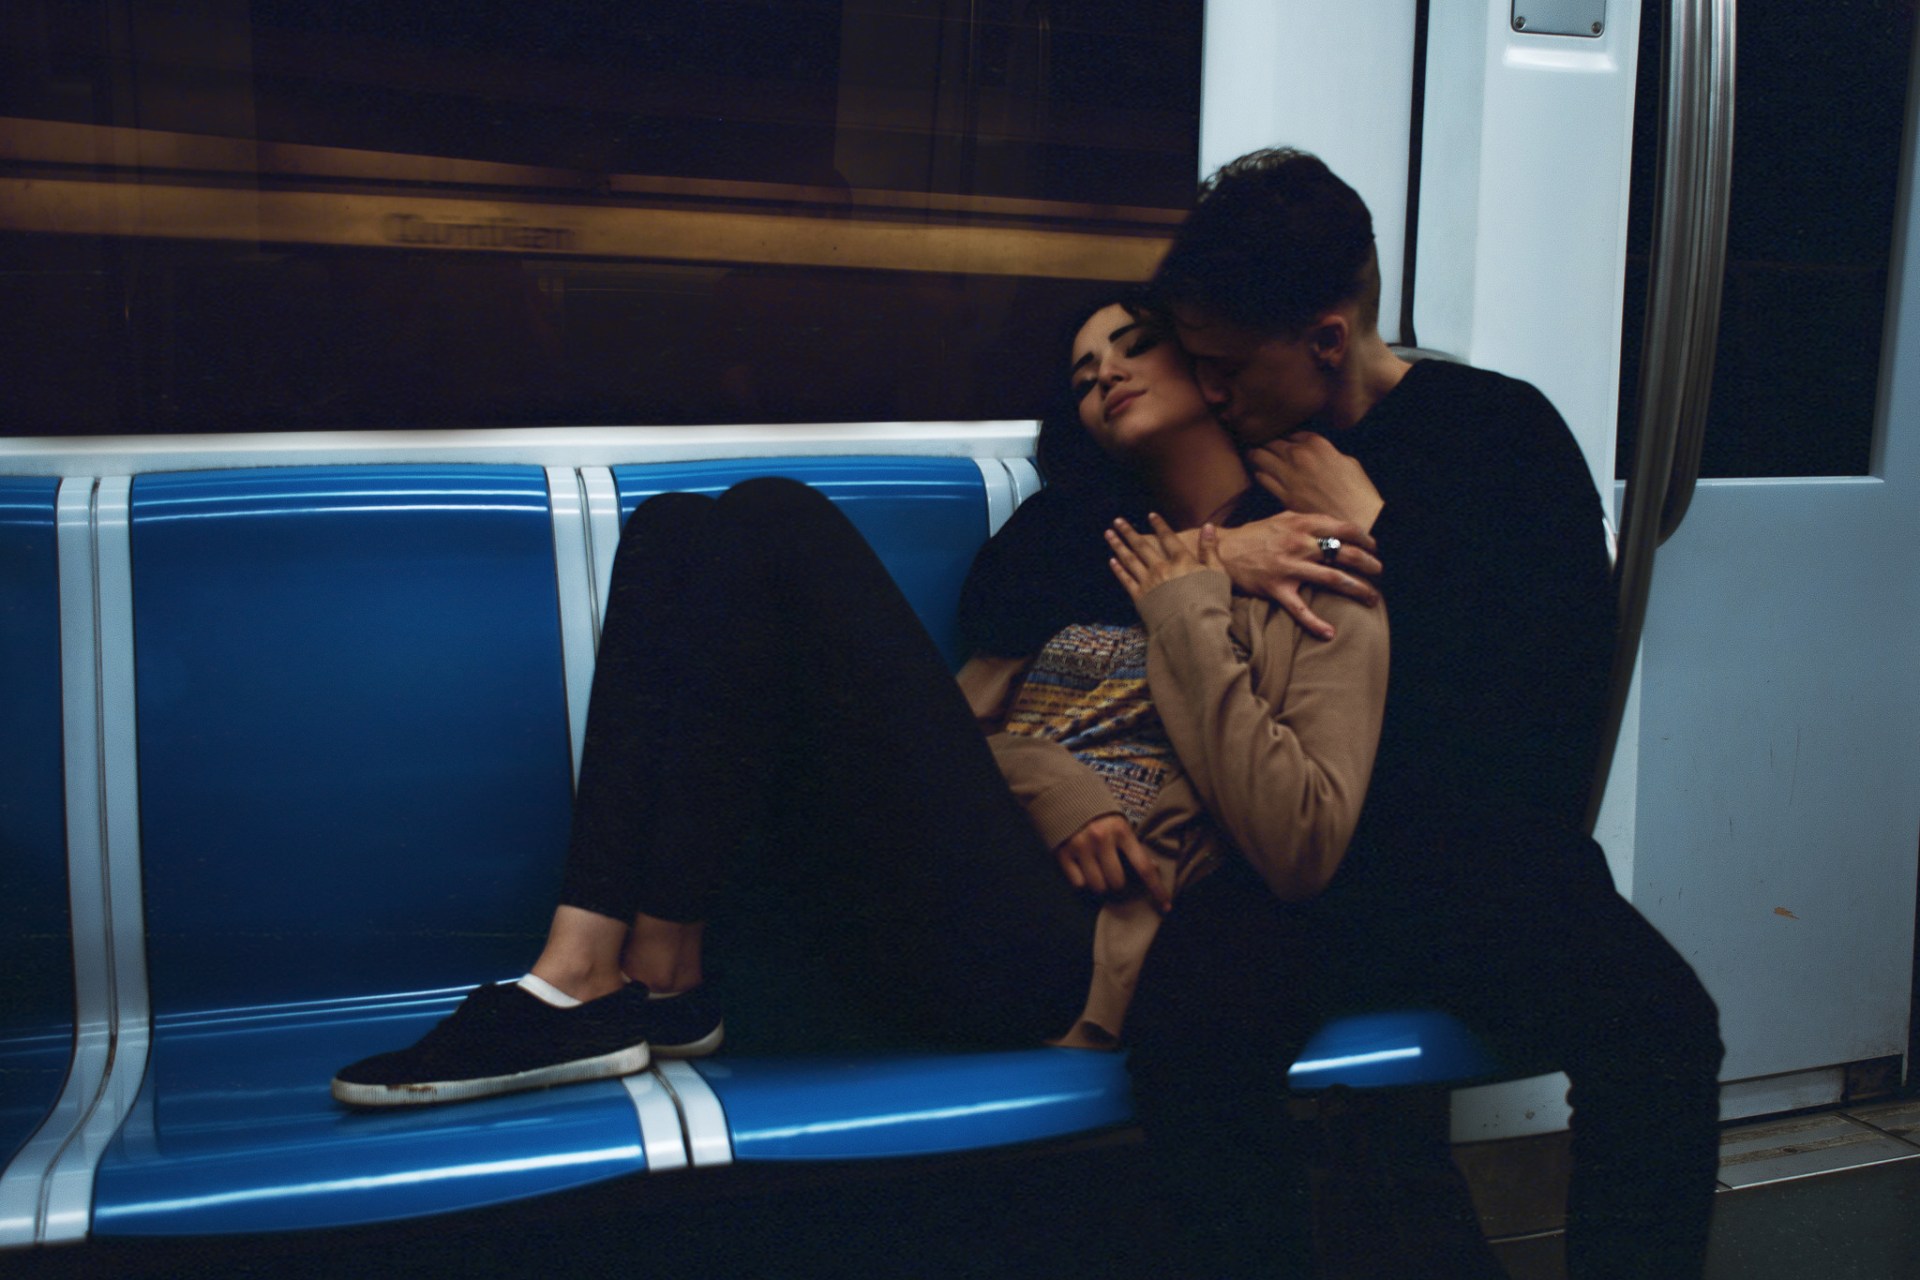 What It's Like To Find A Good Relationship When You Have Anxiety